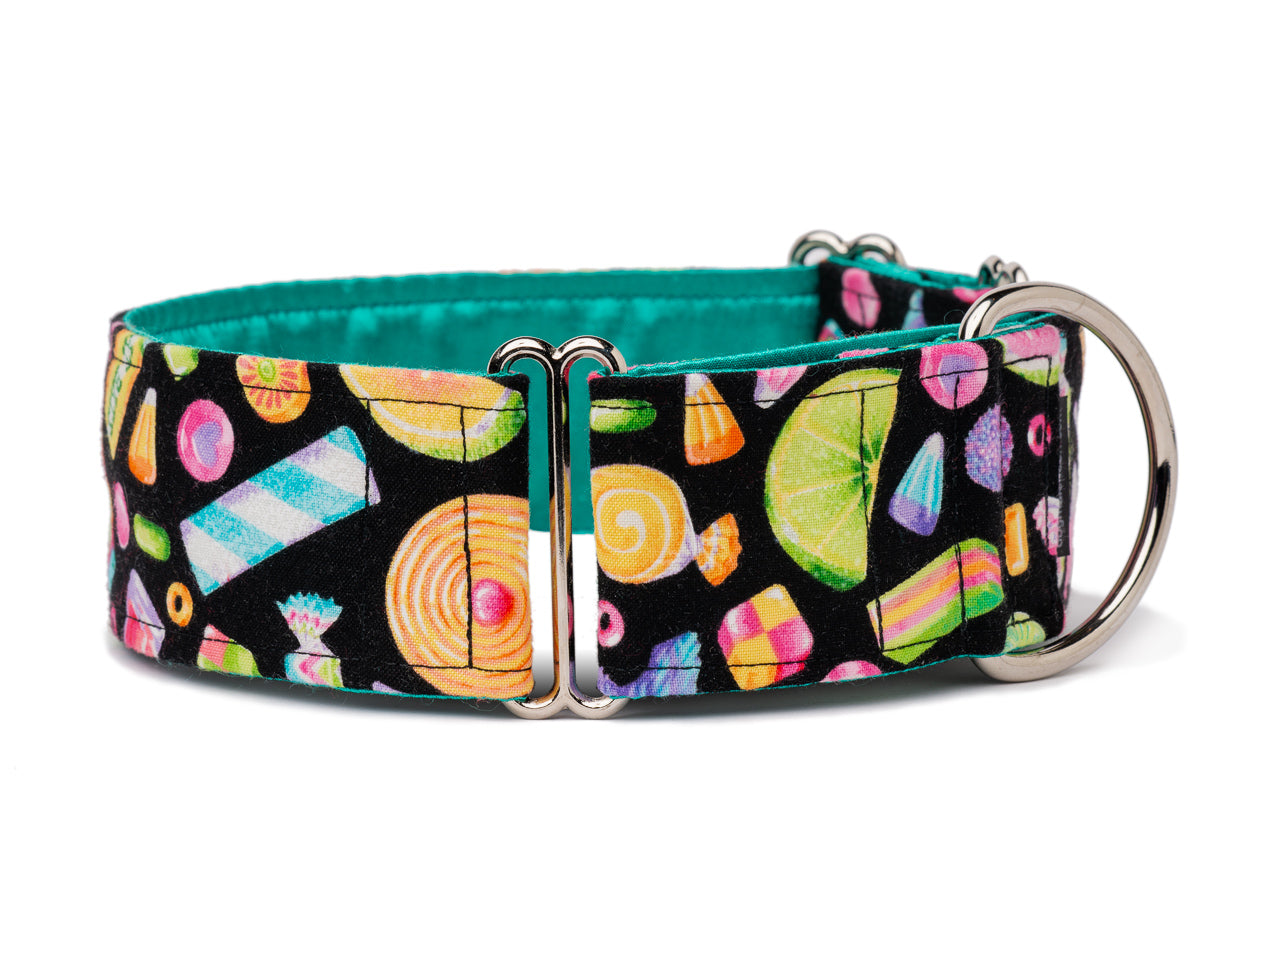 Colorful and retro candies on black are perfect for the sweetest pooch!